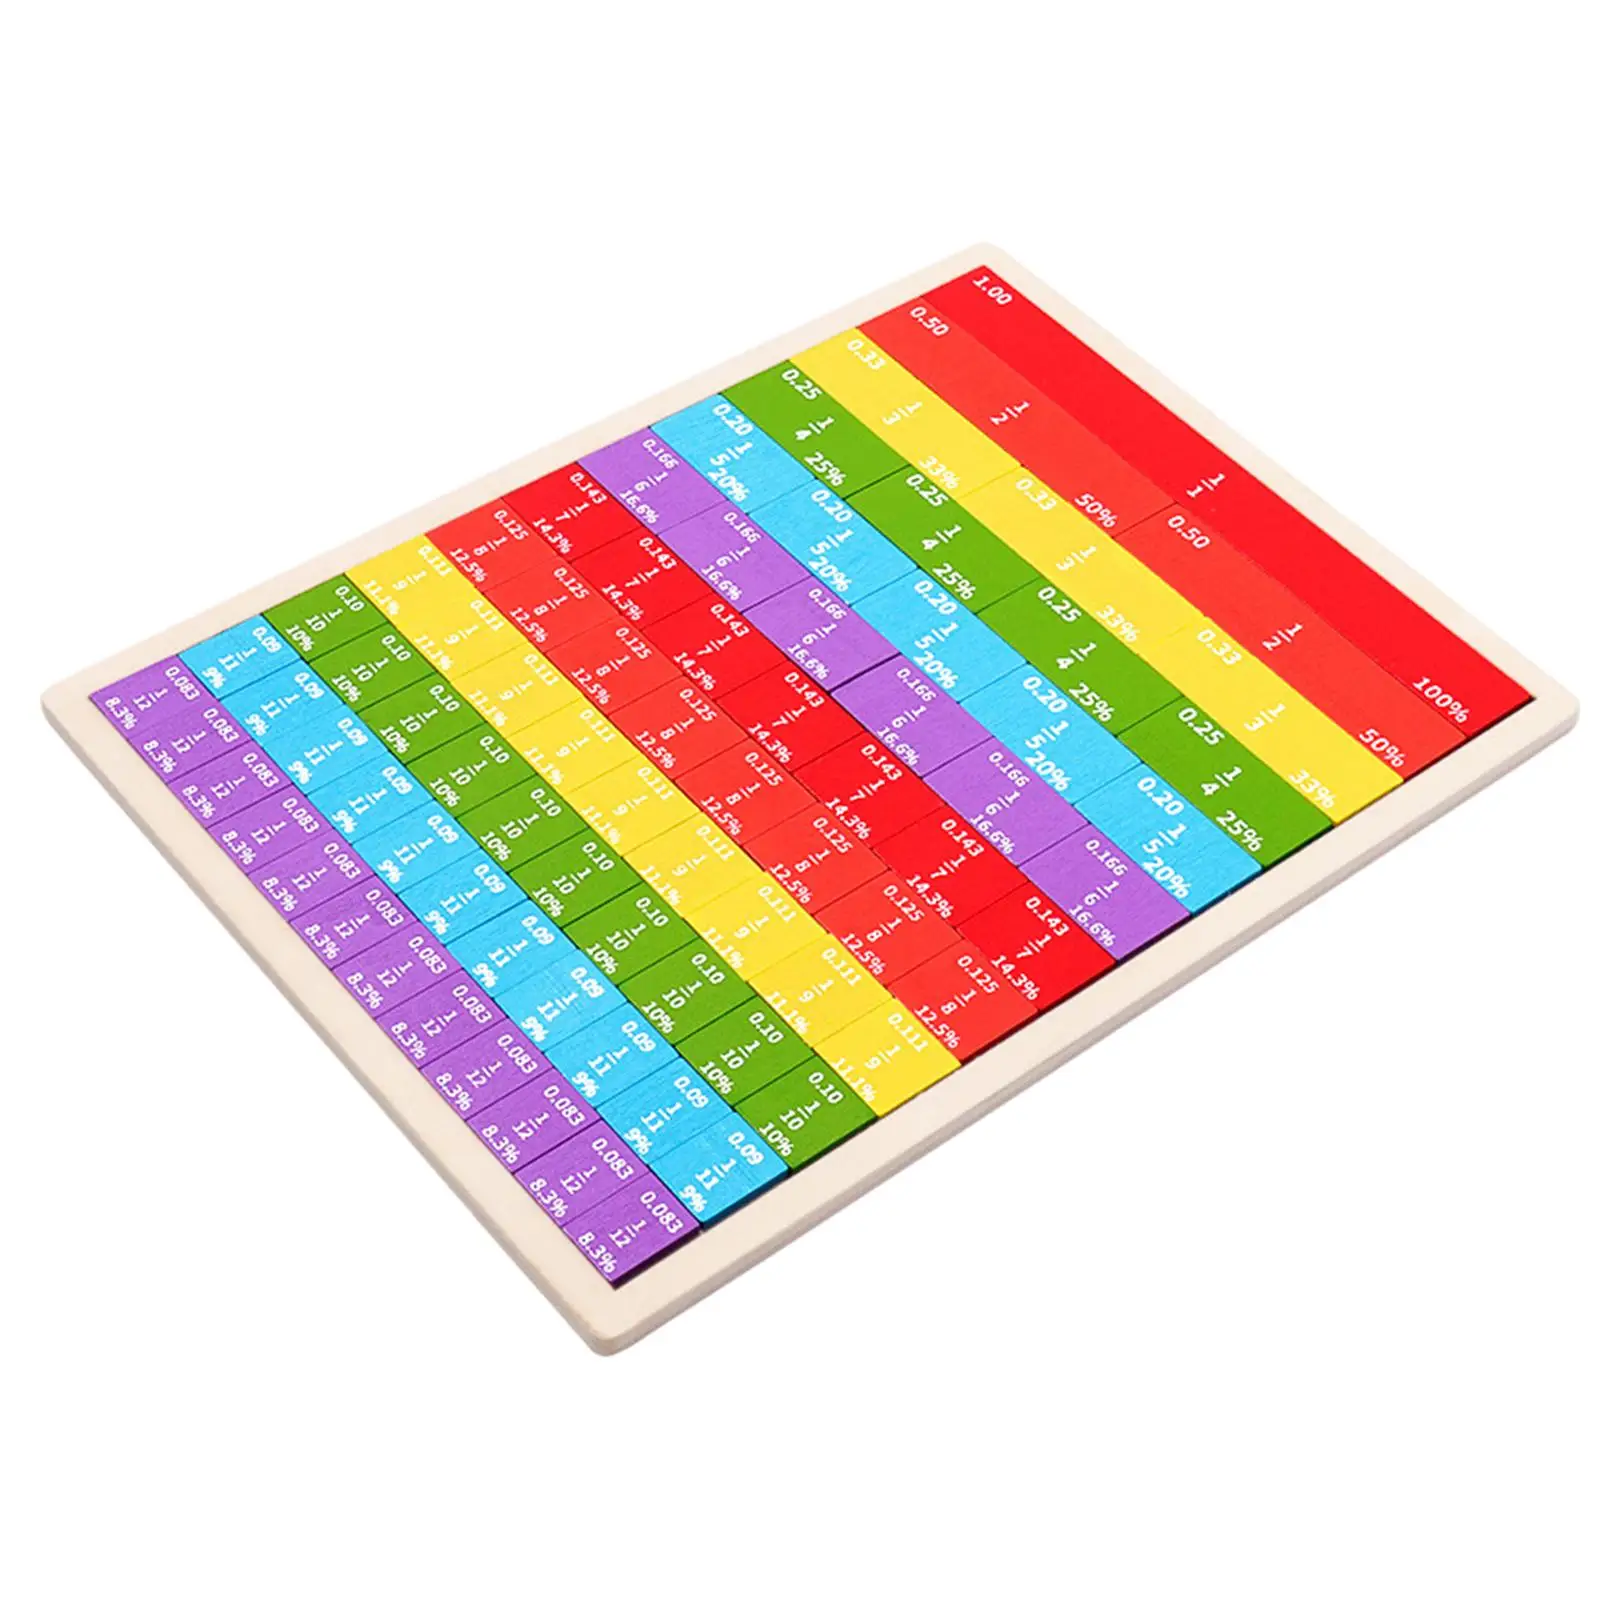 Fraction Tiles Visual Aid Teach Fractions, Decimals and Percent Equivalents for Homeschool Birthday Gift Kids Teacher Elementary